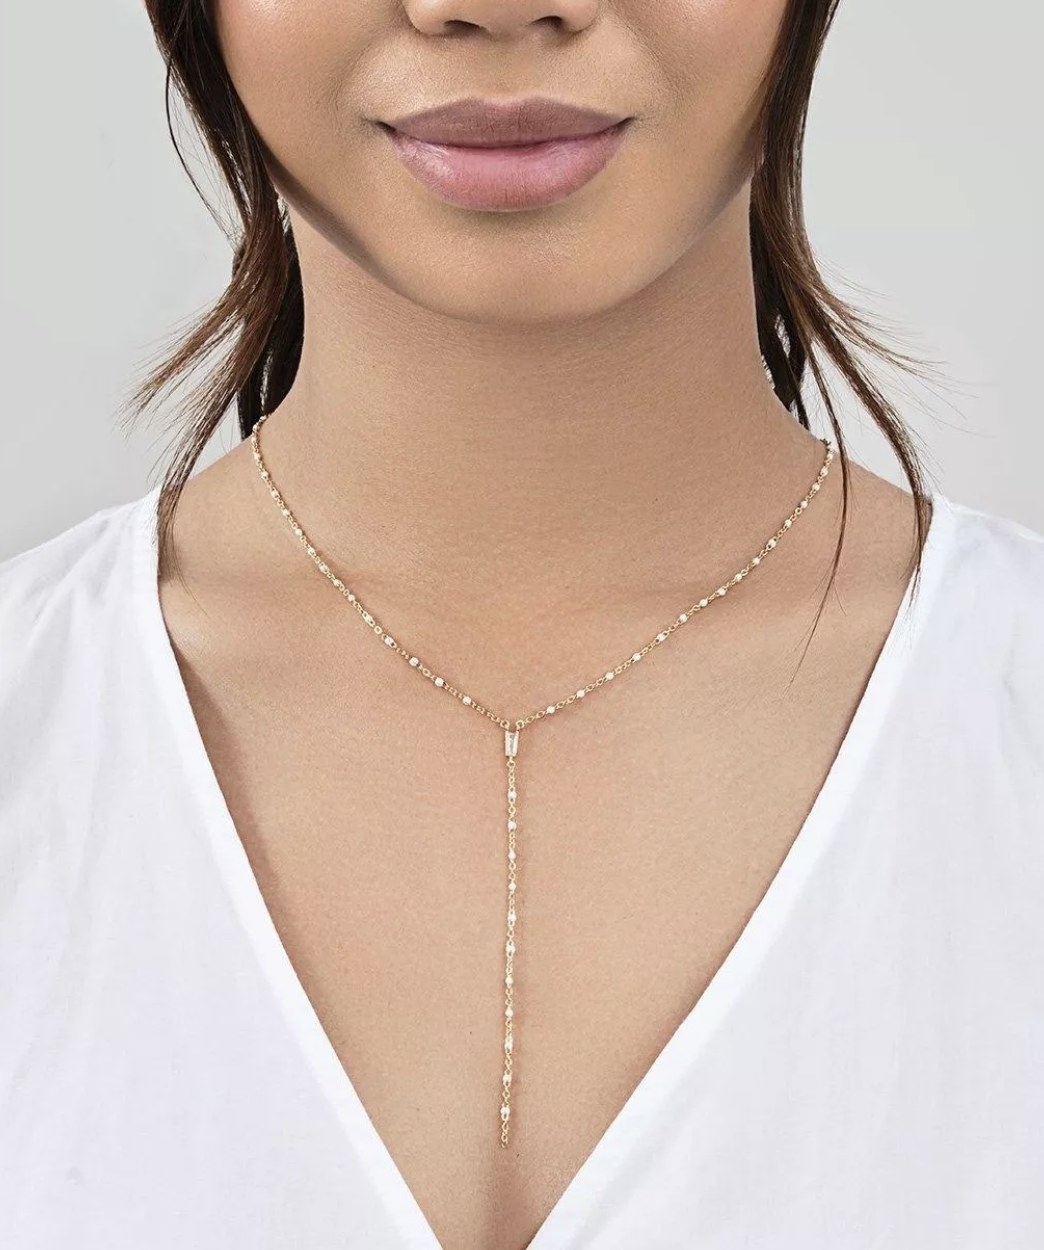 a y-shaped necklace with white beads and gold links